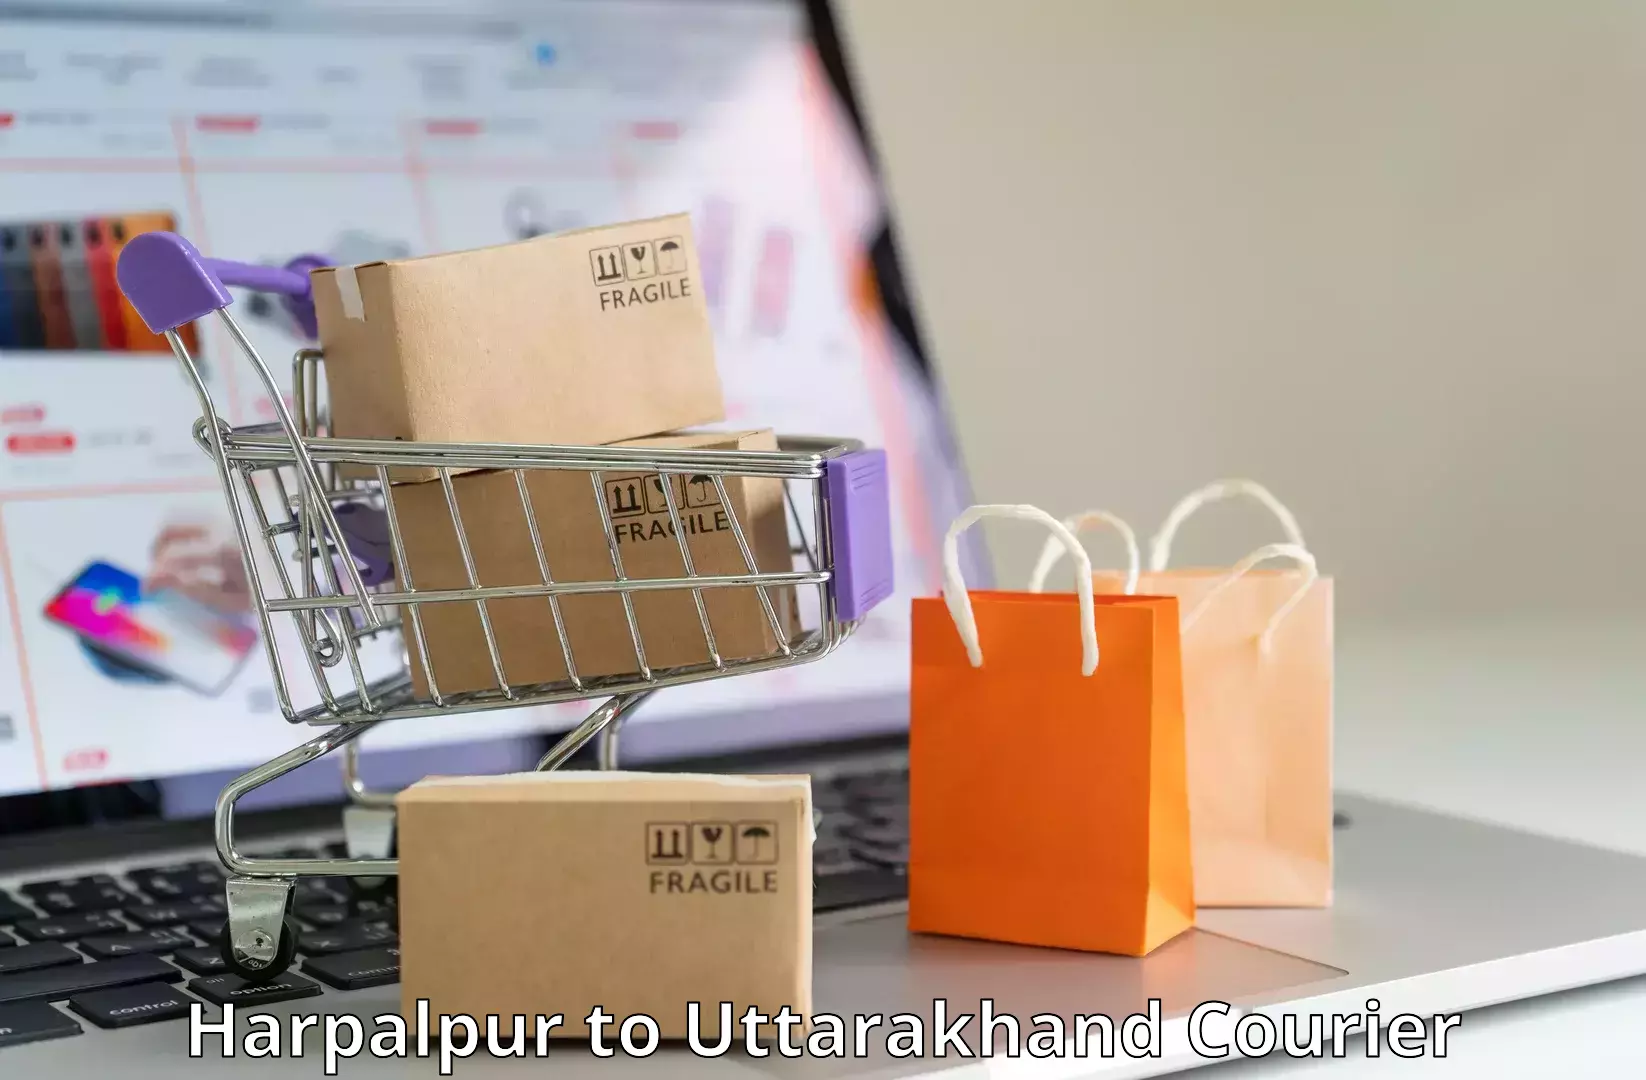 Package delivery network Harpalpur to Almora